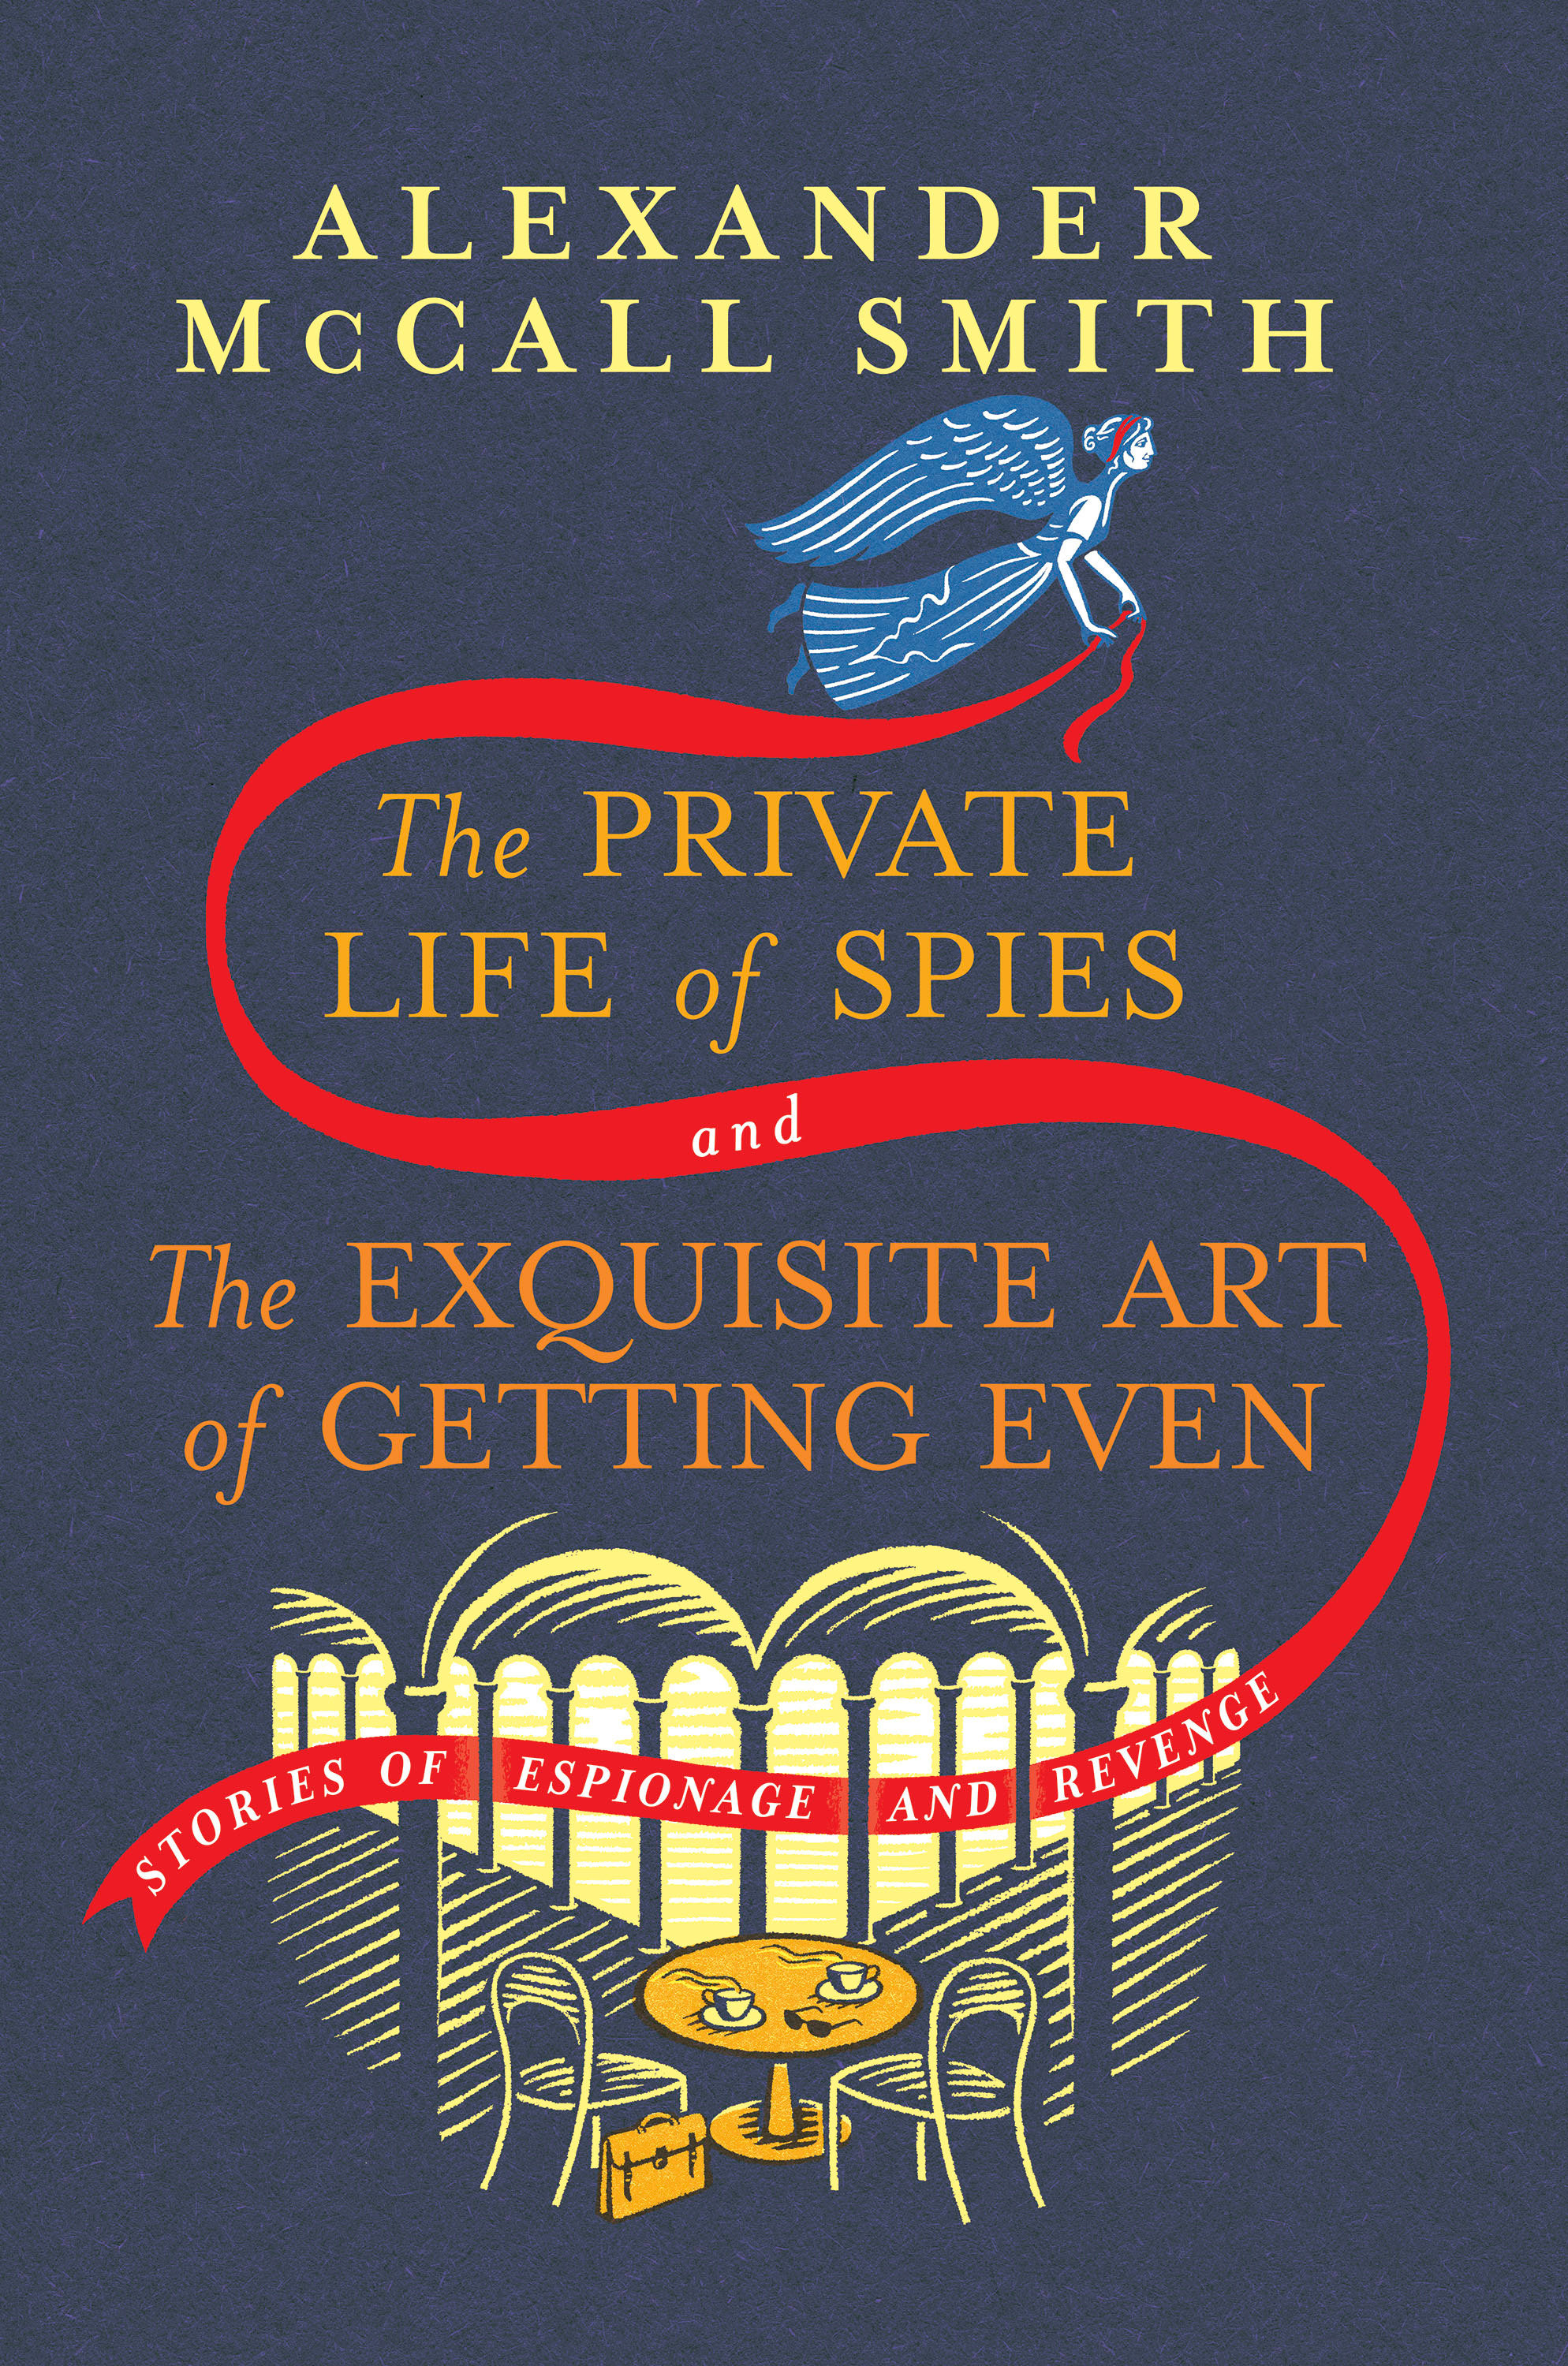 The Private Life Of Spies and the Exquisite Art Of Getting Even (Hardcover Book)